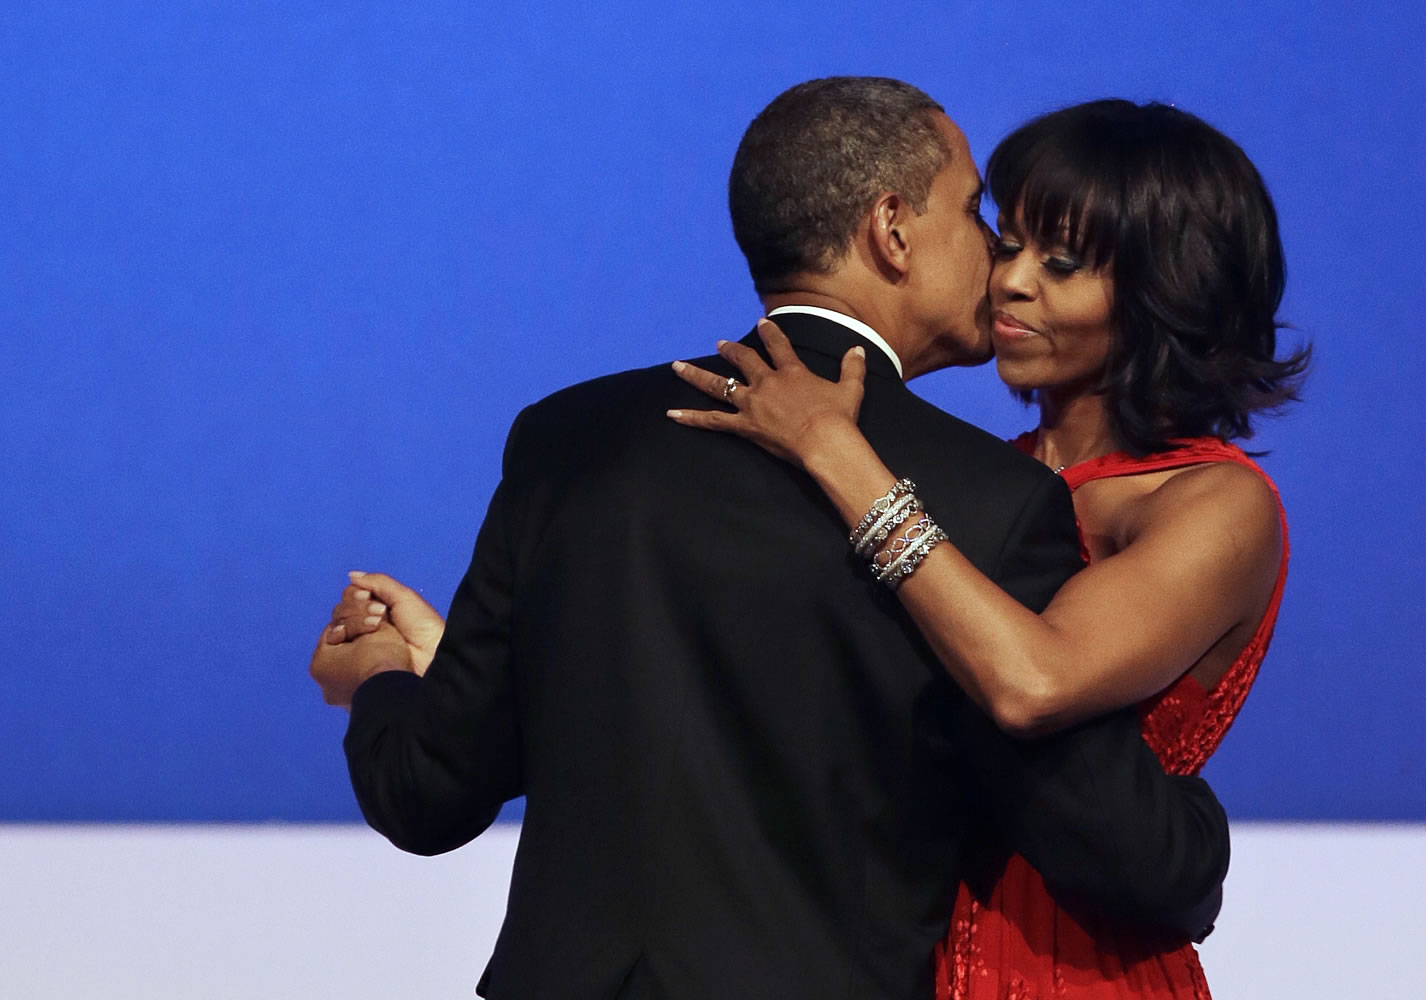 President Barack Obama kisses first lady Michelle Obama during their dance at the Commander-in-Chief Inaugural Ball at the Washington Convention Center in Washington on Jan.